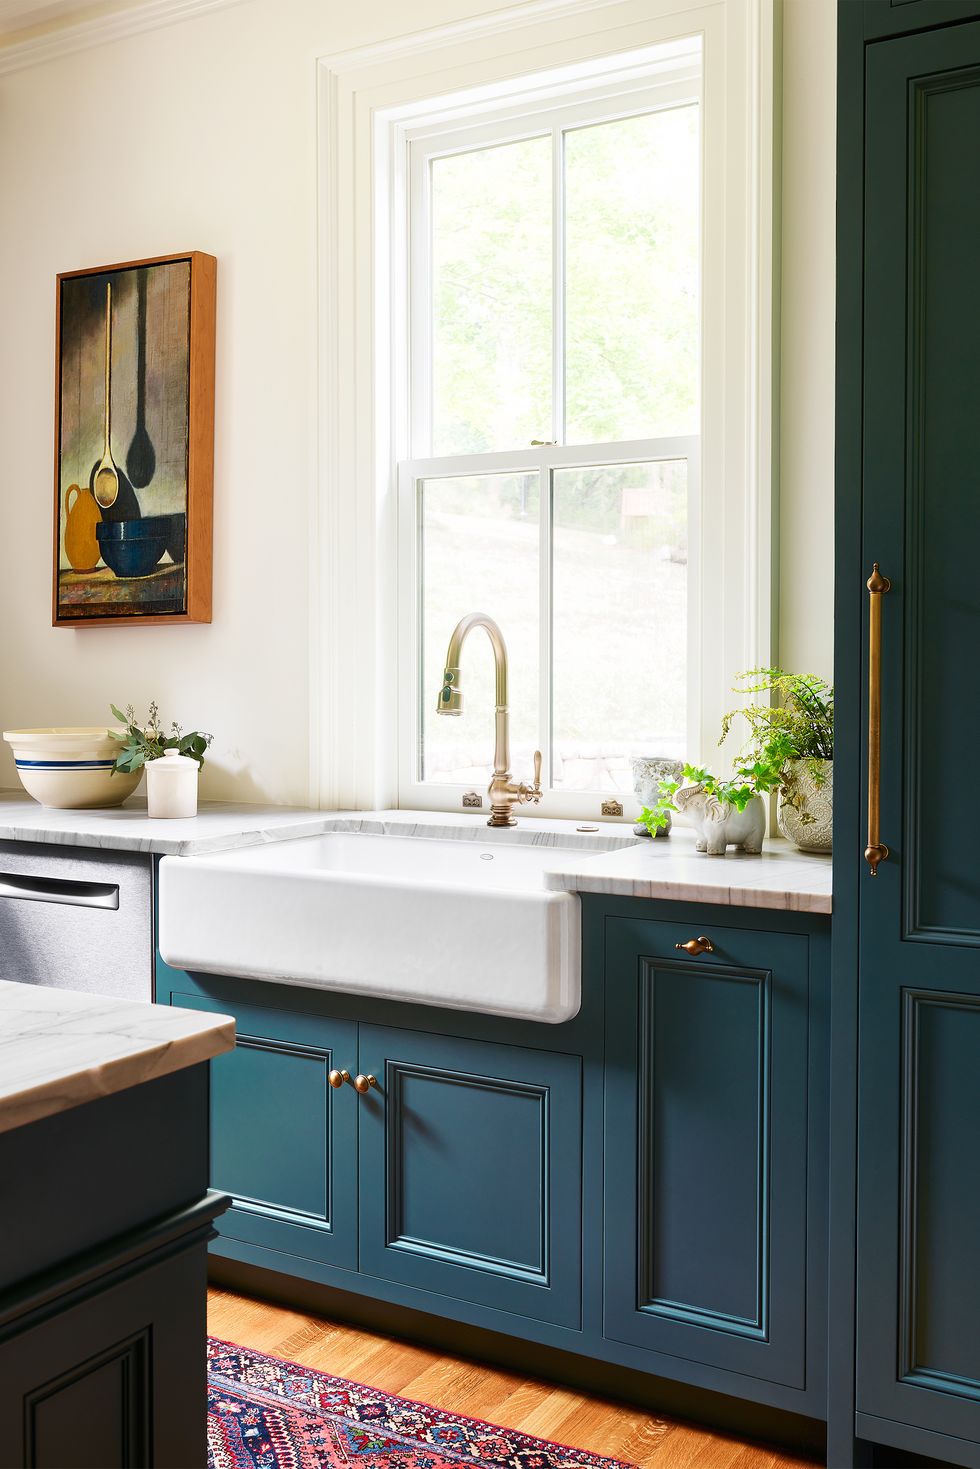 50 of the Very Best Kitchen Color Ideas